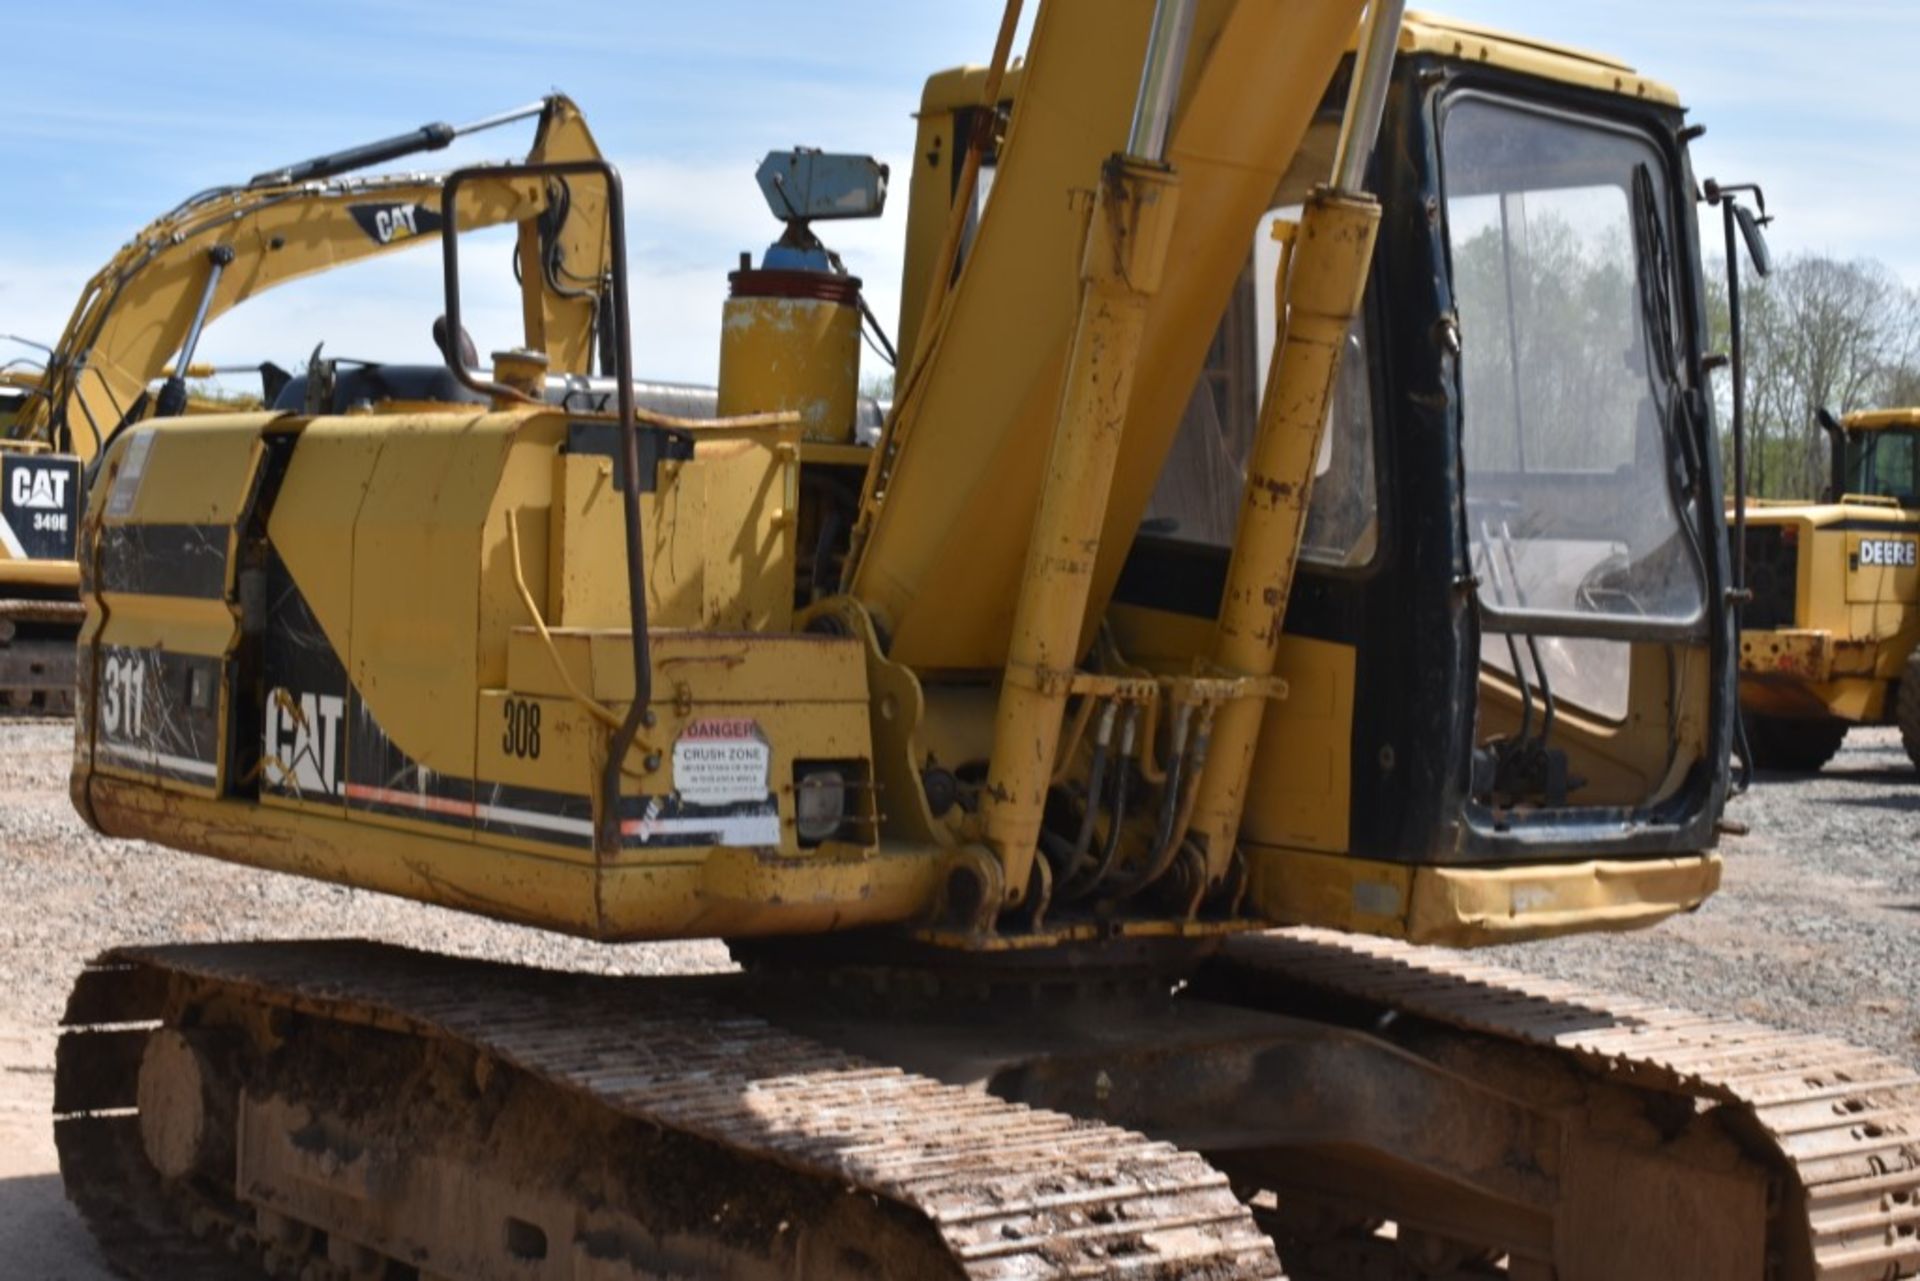 CAT 311 Excavator 21370 Hours, Runs and Operates, WR 48" Hydraulic Swivel Bucket, Auxiliary - Image 13 of 42